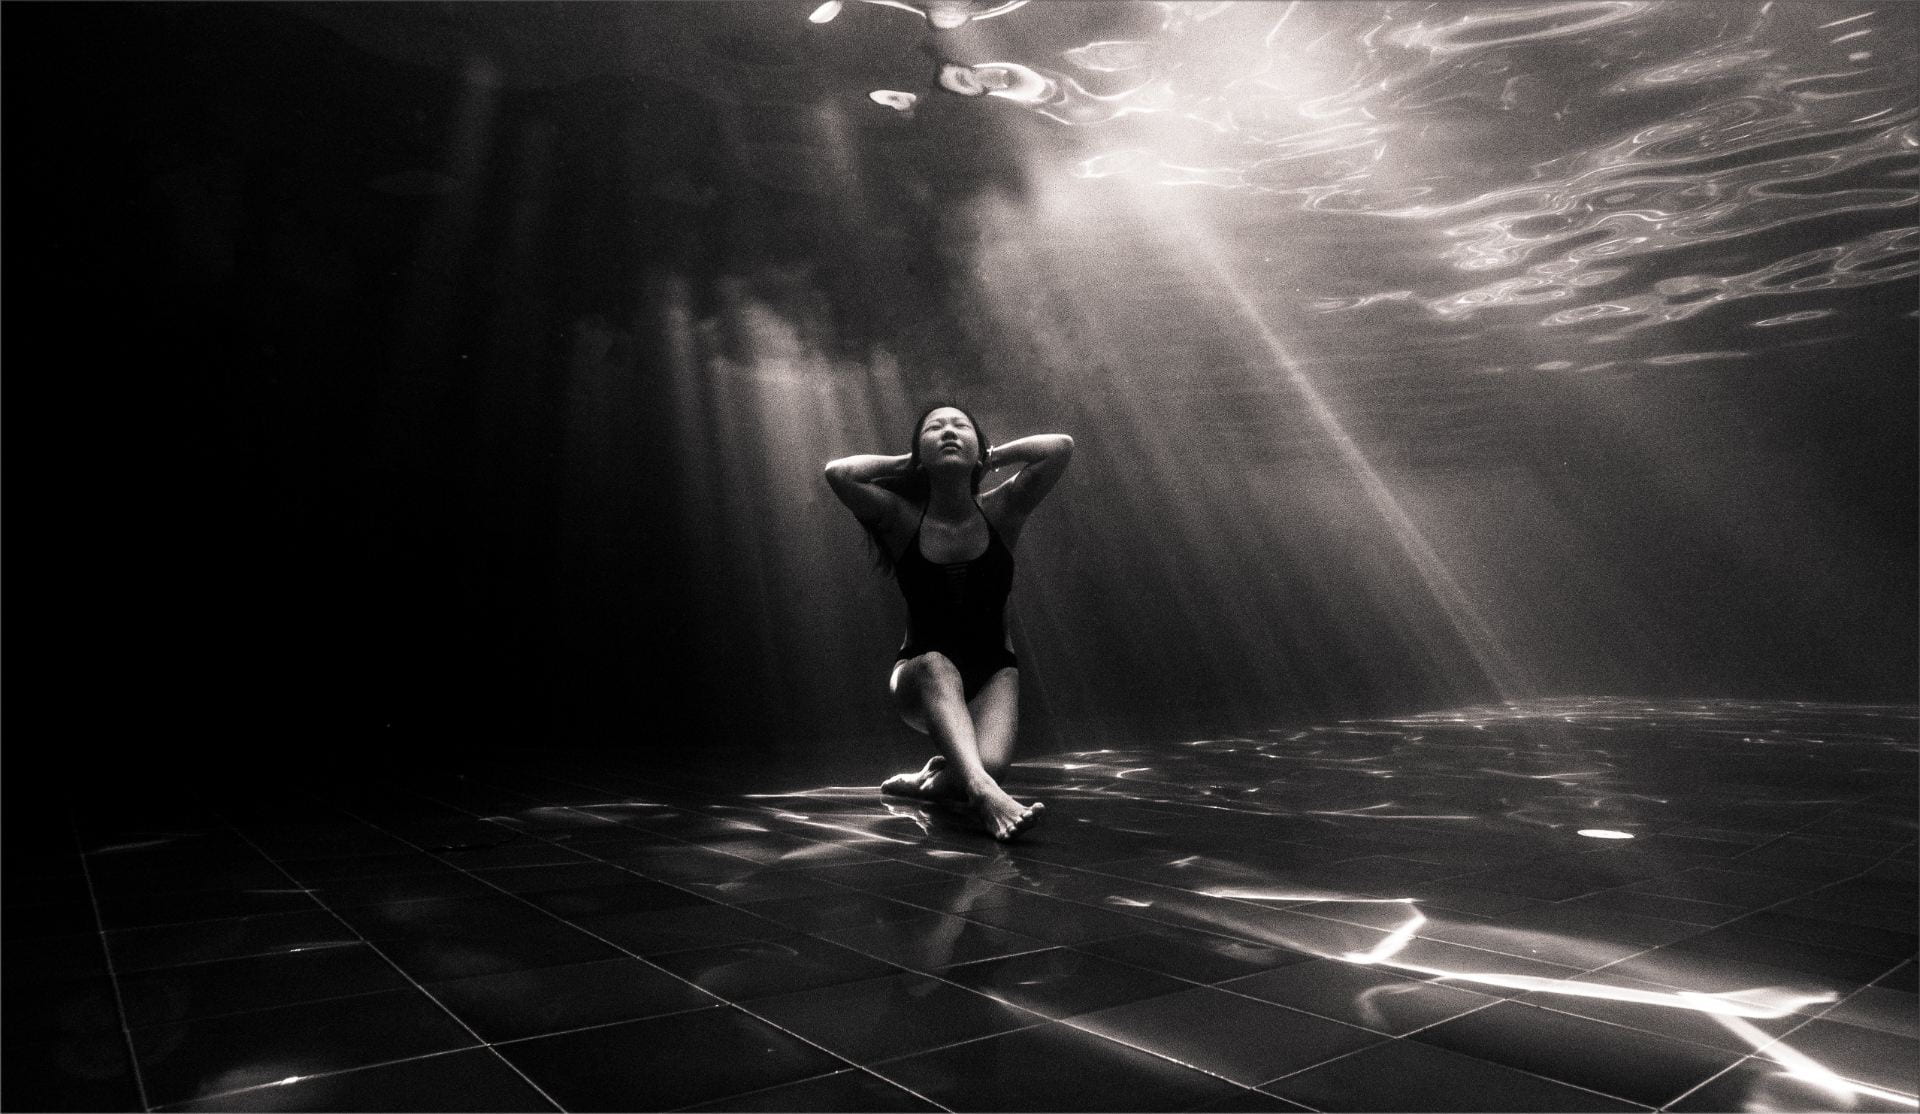 [Black and white photo of a person sitting underwater at the bottom of a pool with light streaming in behind them.]